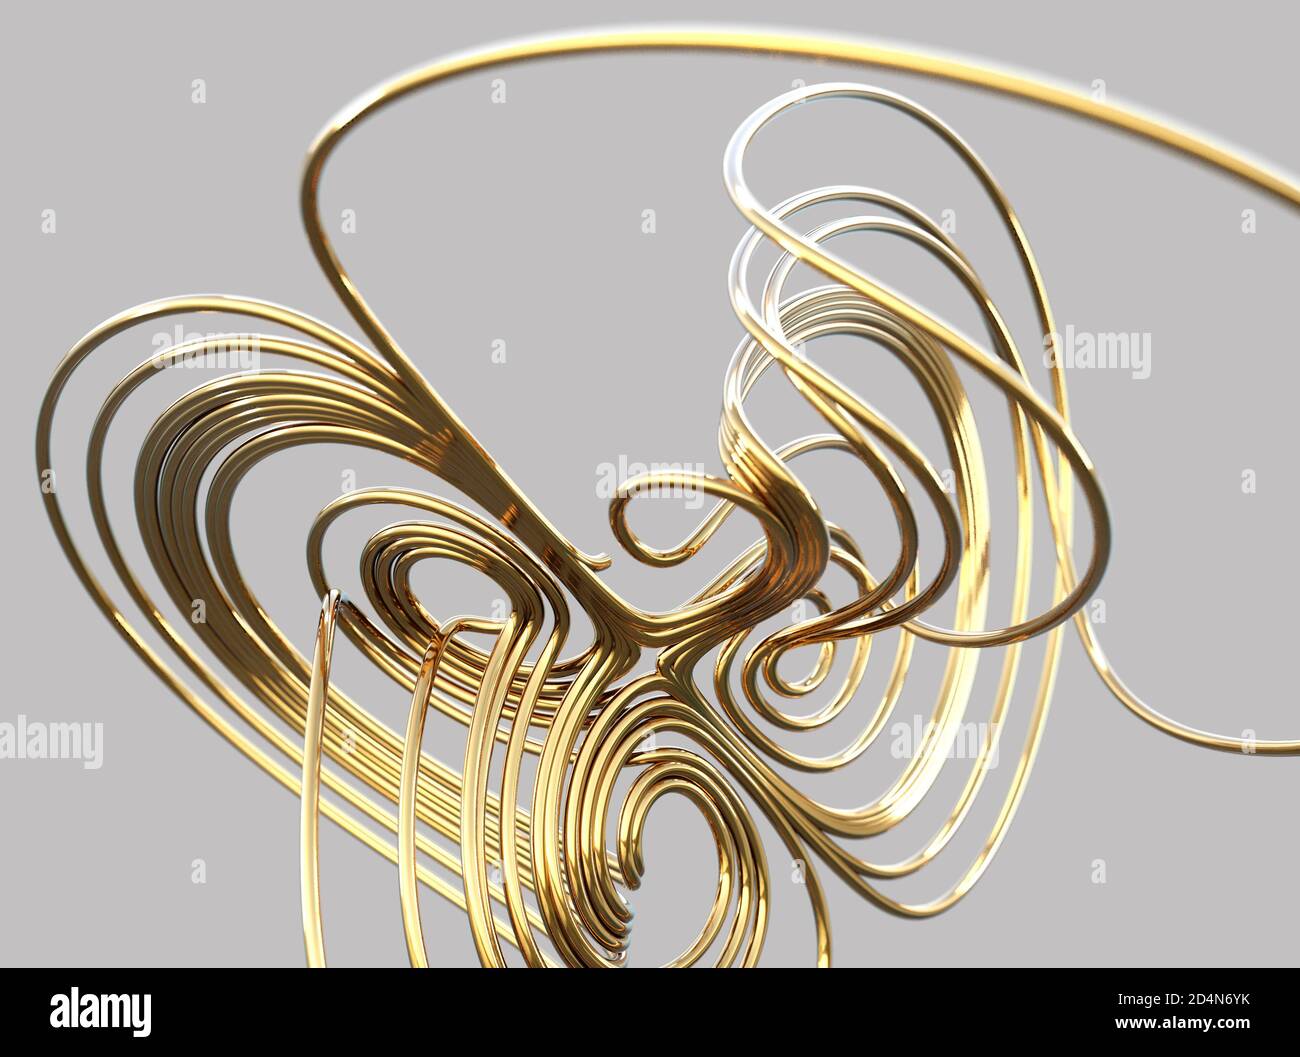 3d gold wire mathematical knot against gray background, 3d illustration Stock Photo